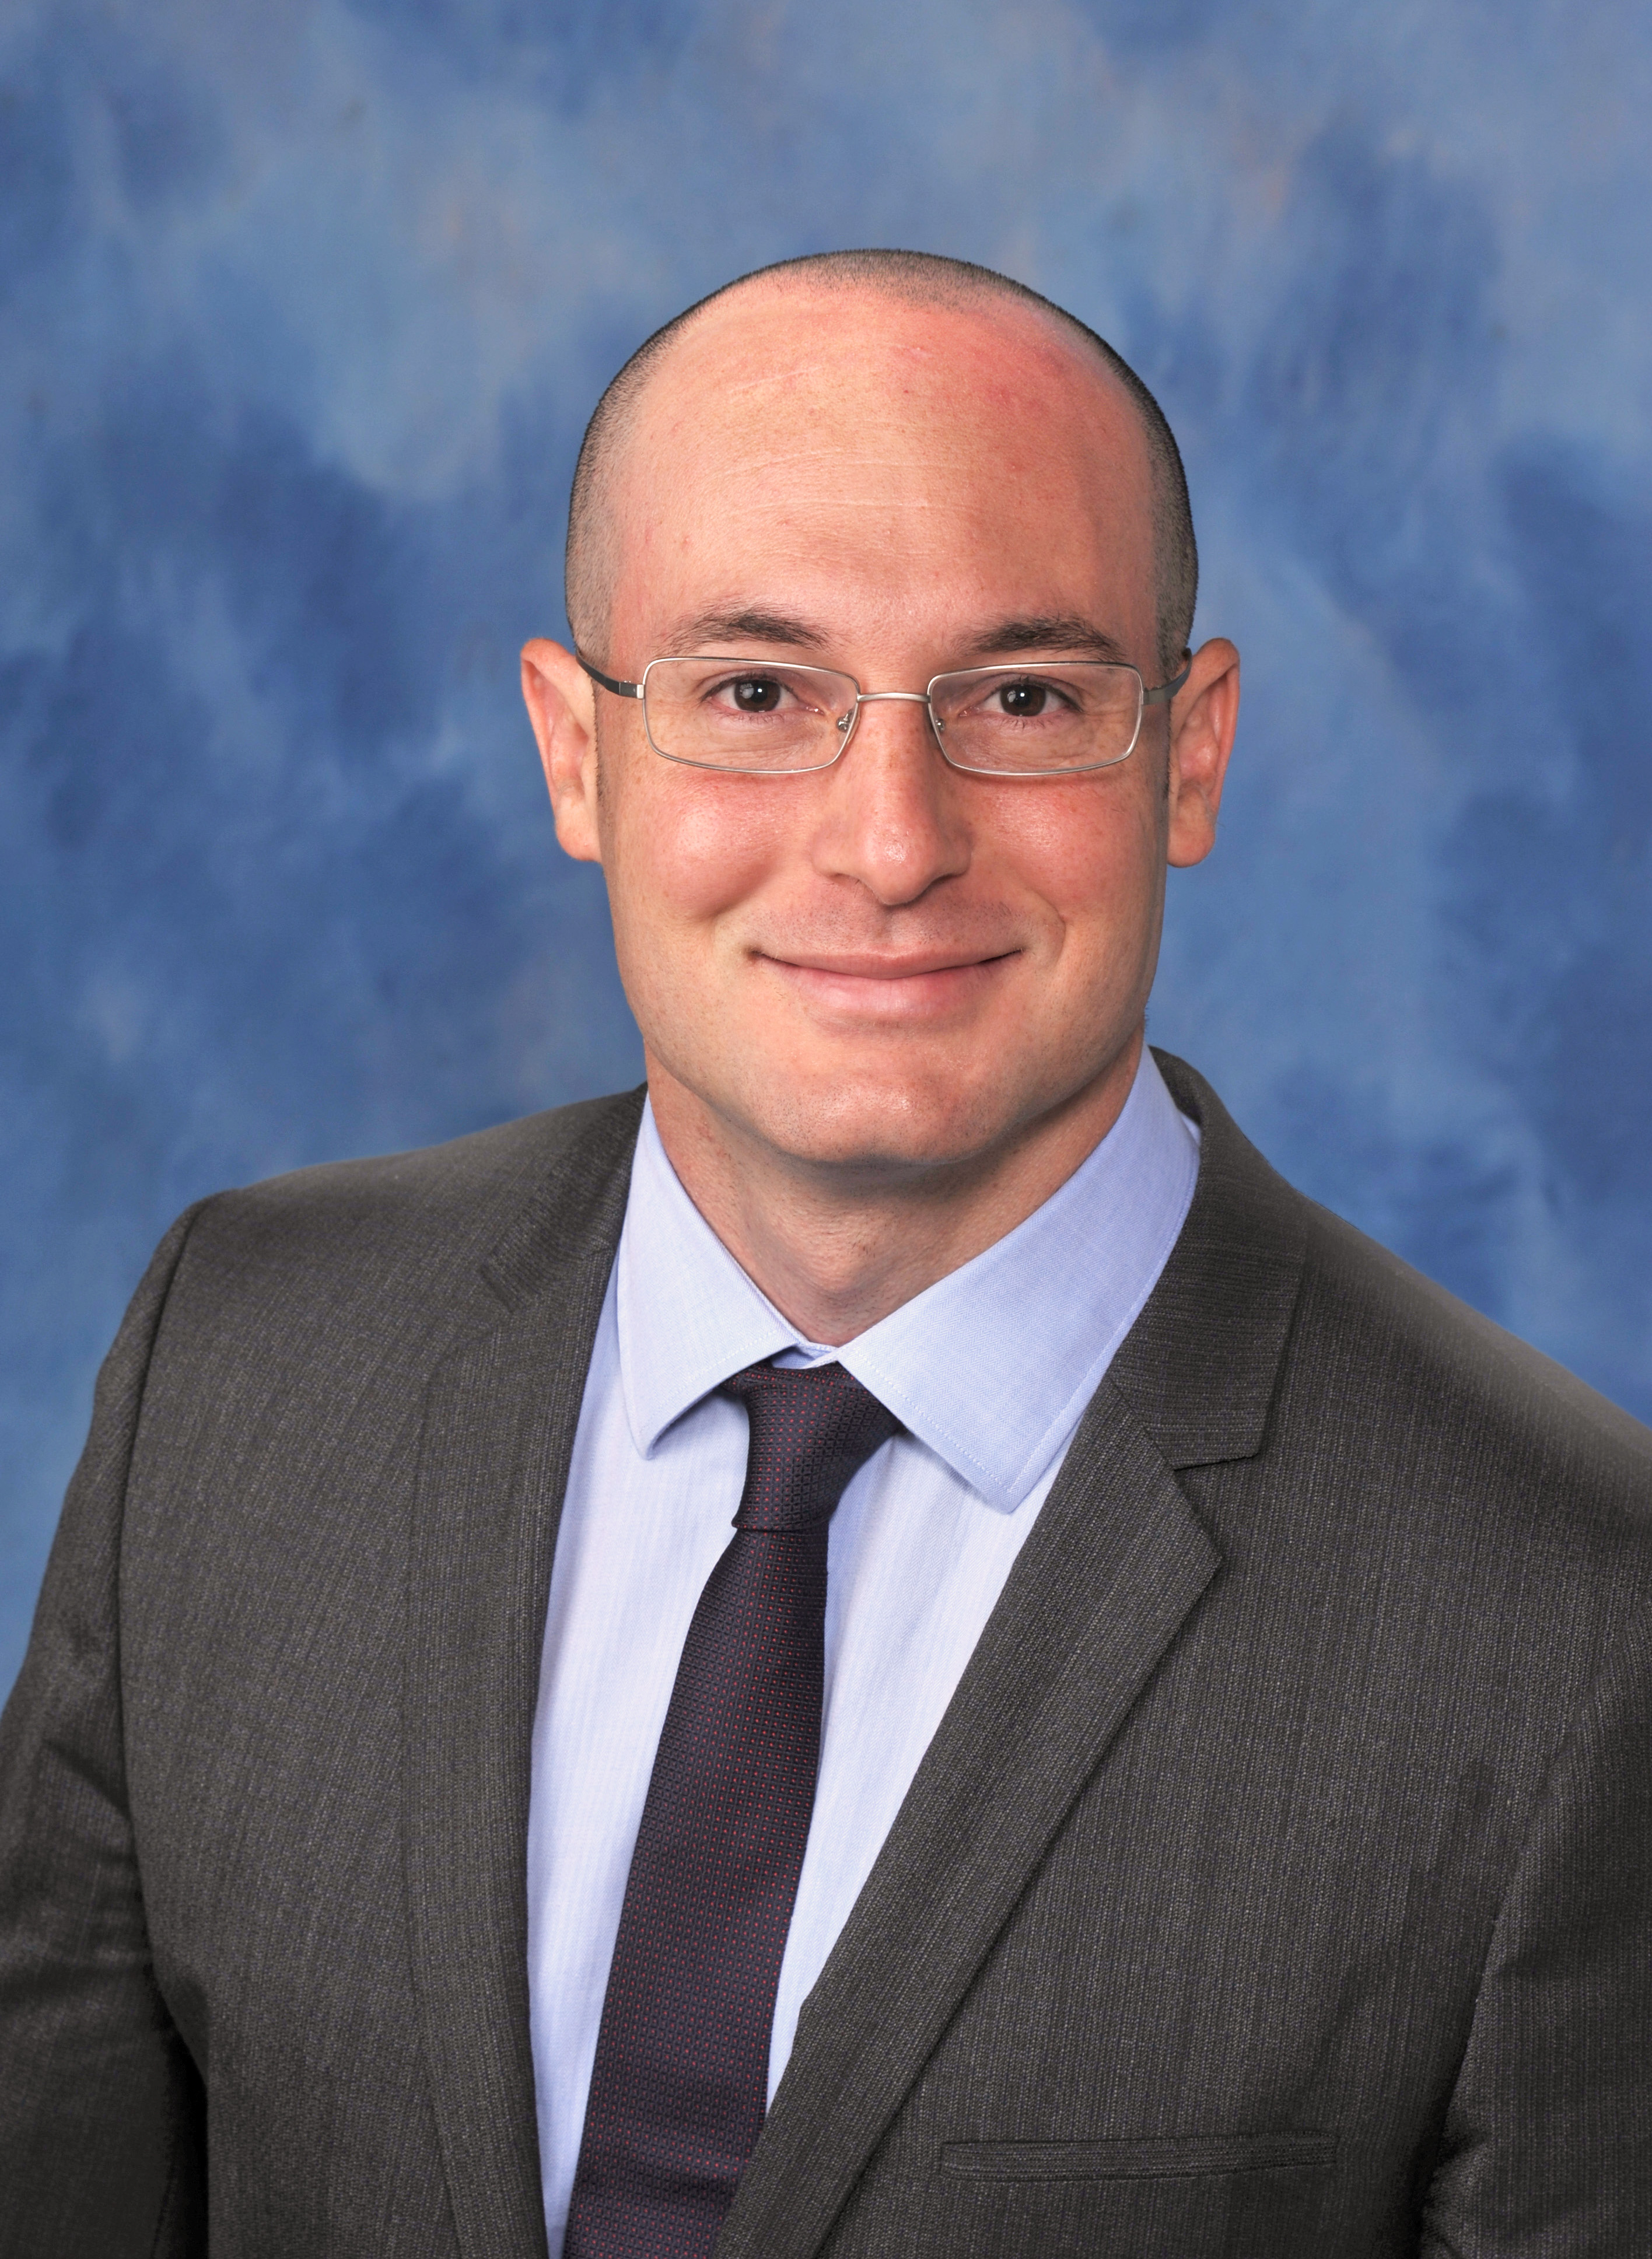 Dr. Daniel Benhayon is a board-certified cardiac electrophysiologist at the Memorial Cardiac and Vascular Institute.